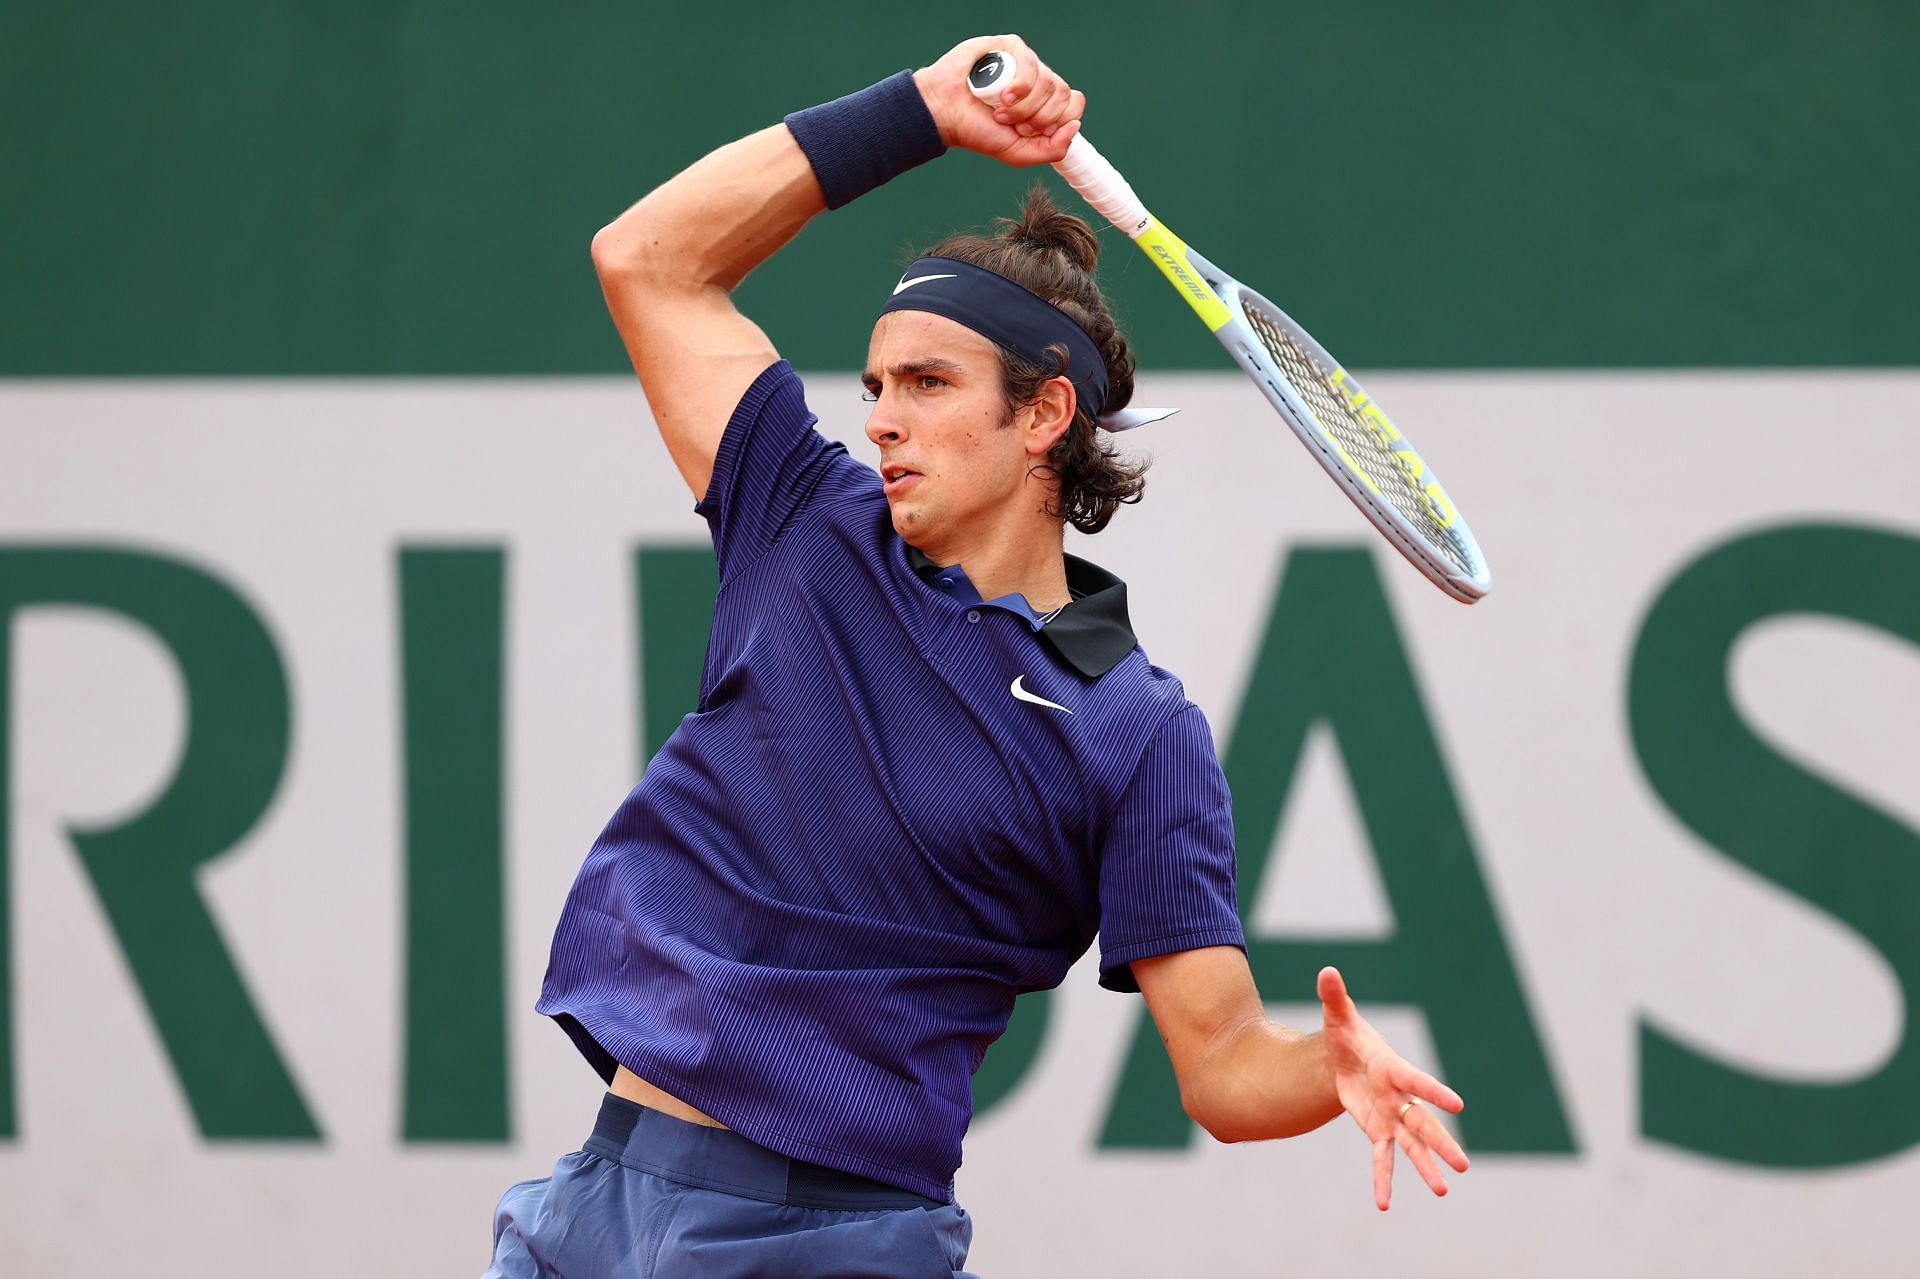 Musetti at the 2021 French Open.